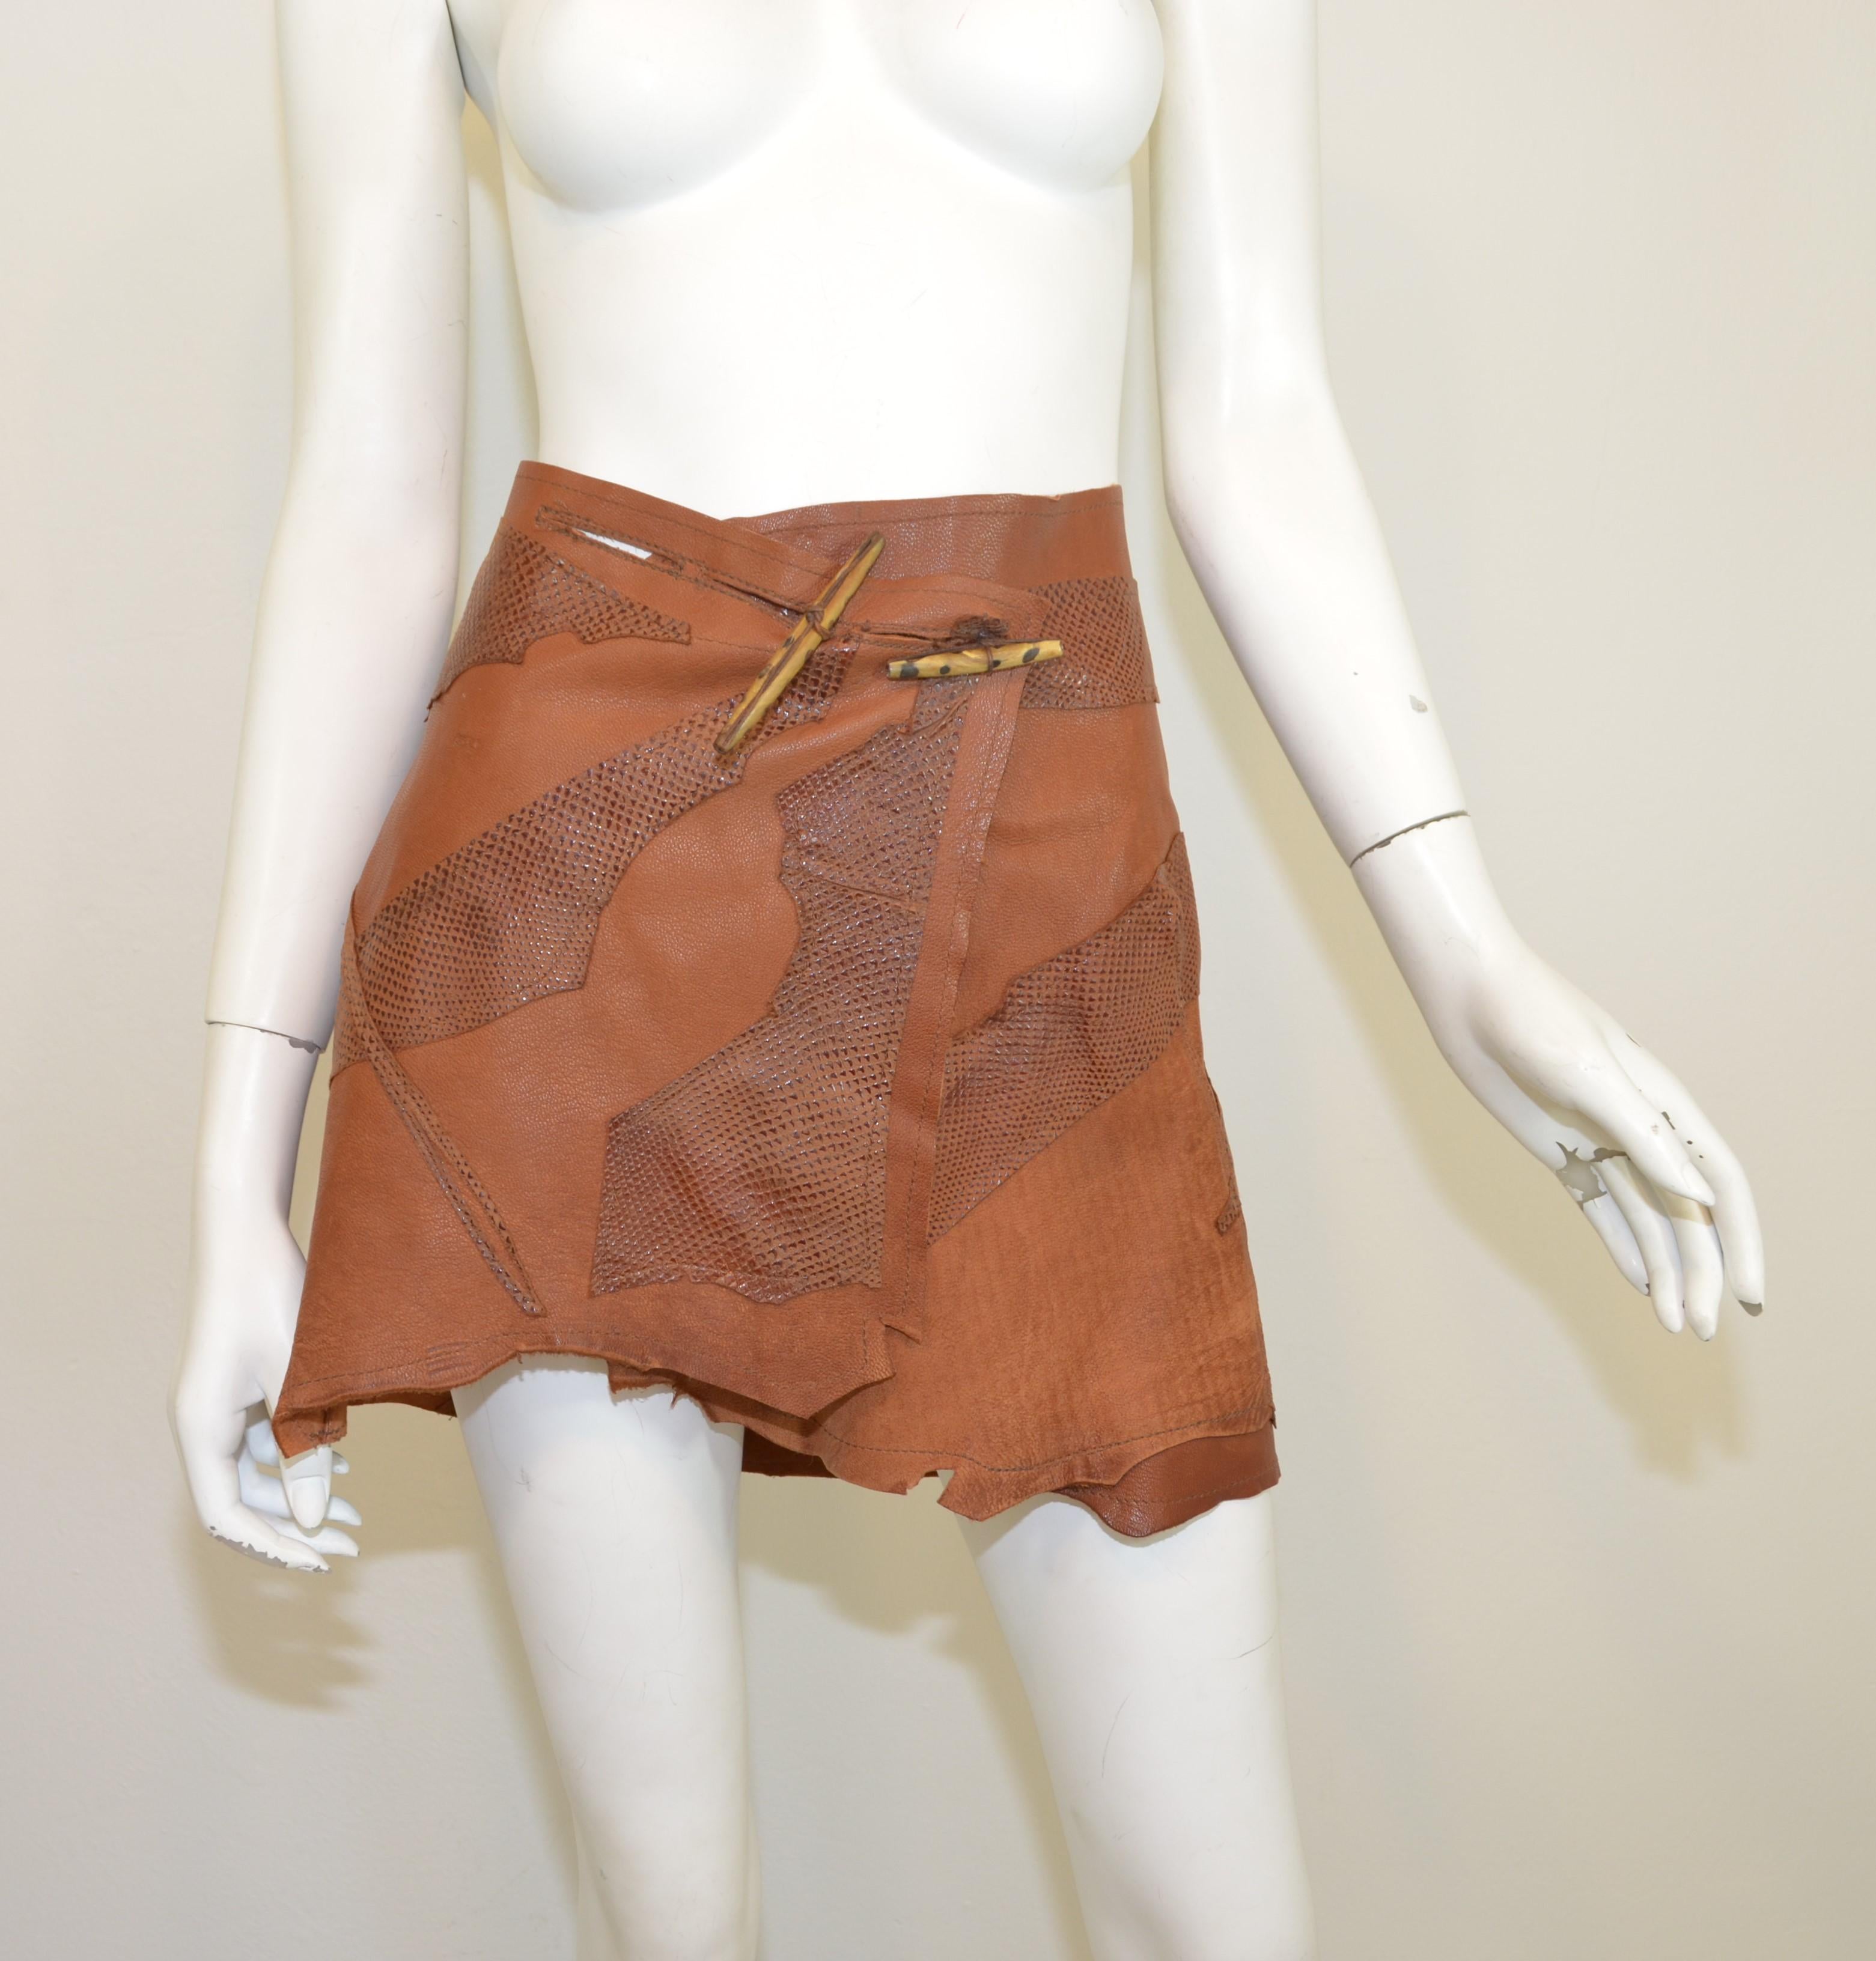 Vintage Dolce & Gabbana leather skirt featured in a cognac/chestnut color with unique toggle fastenings. Made in Italy. Excellent condition.

Measurements:
waist 29''
hips 33''
length 16''